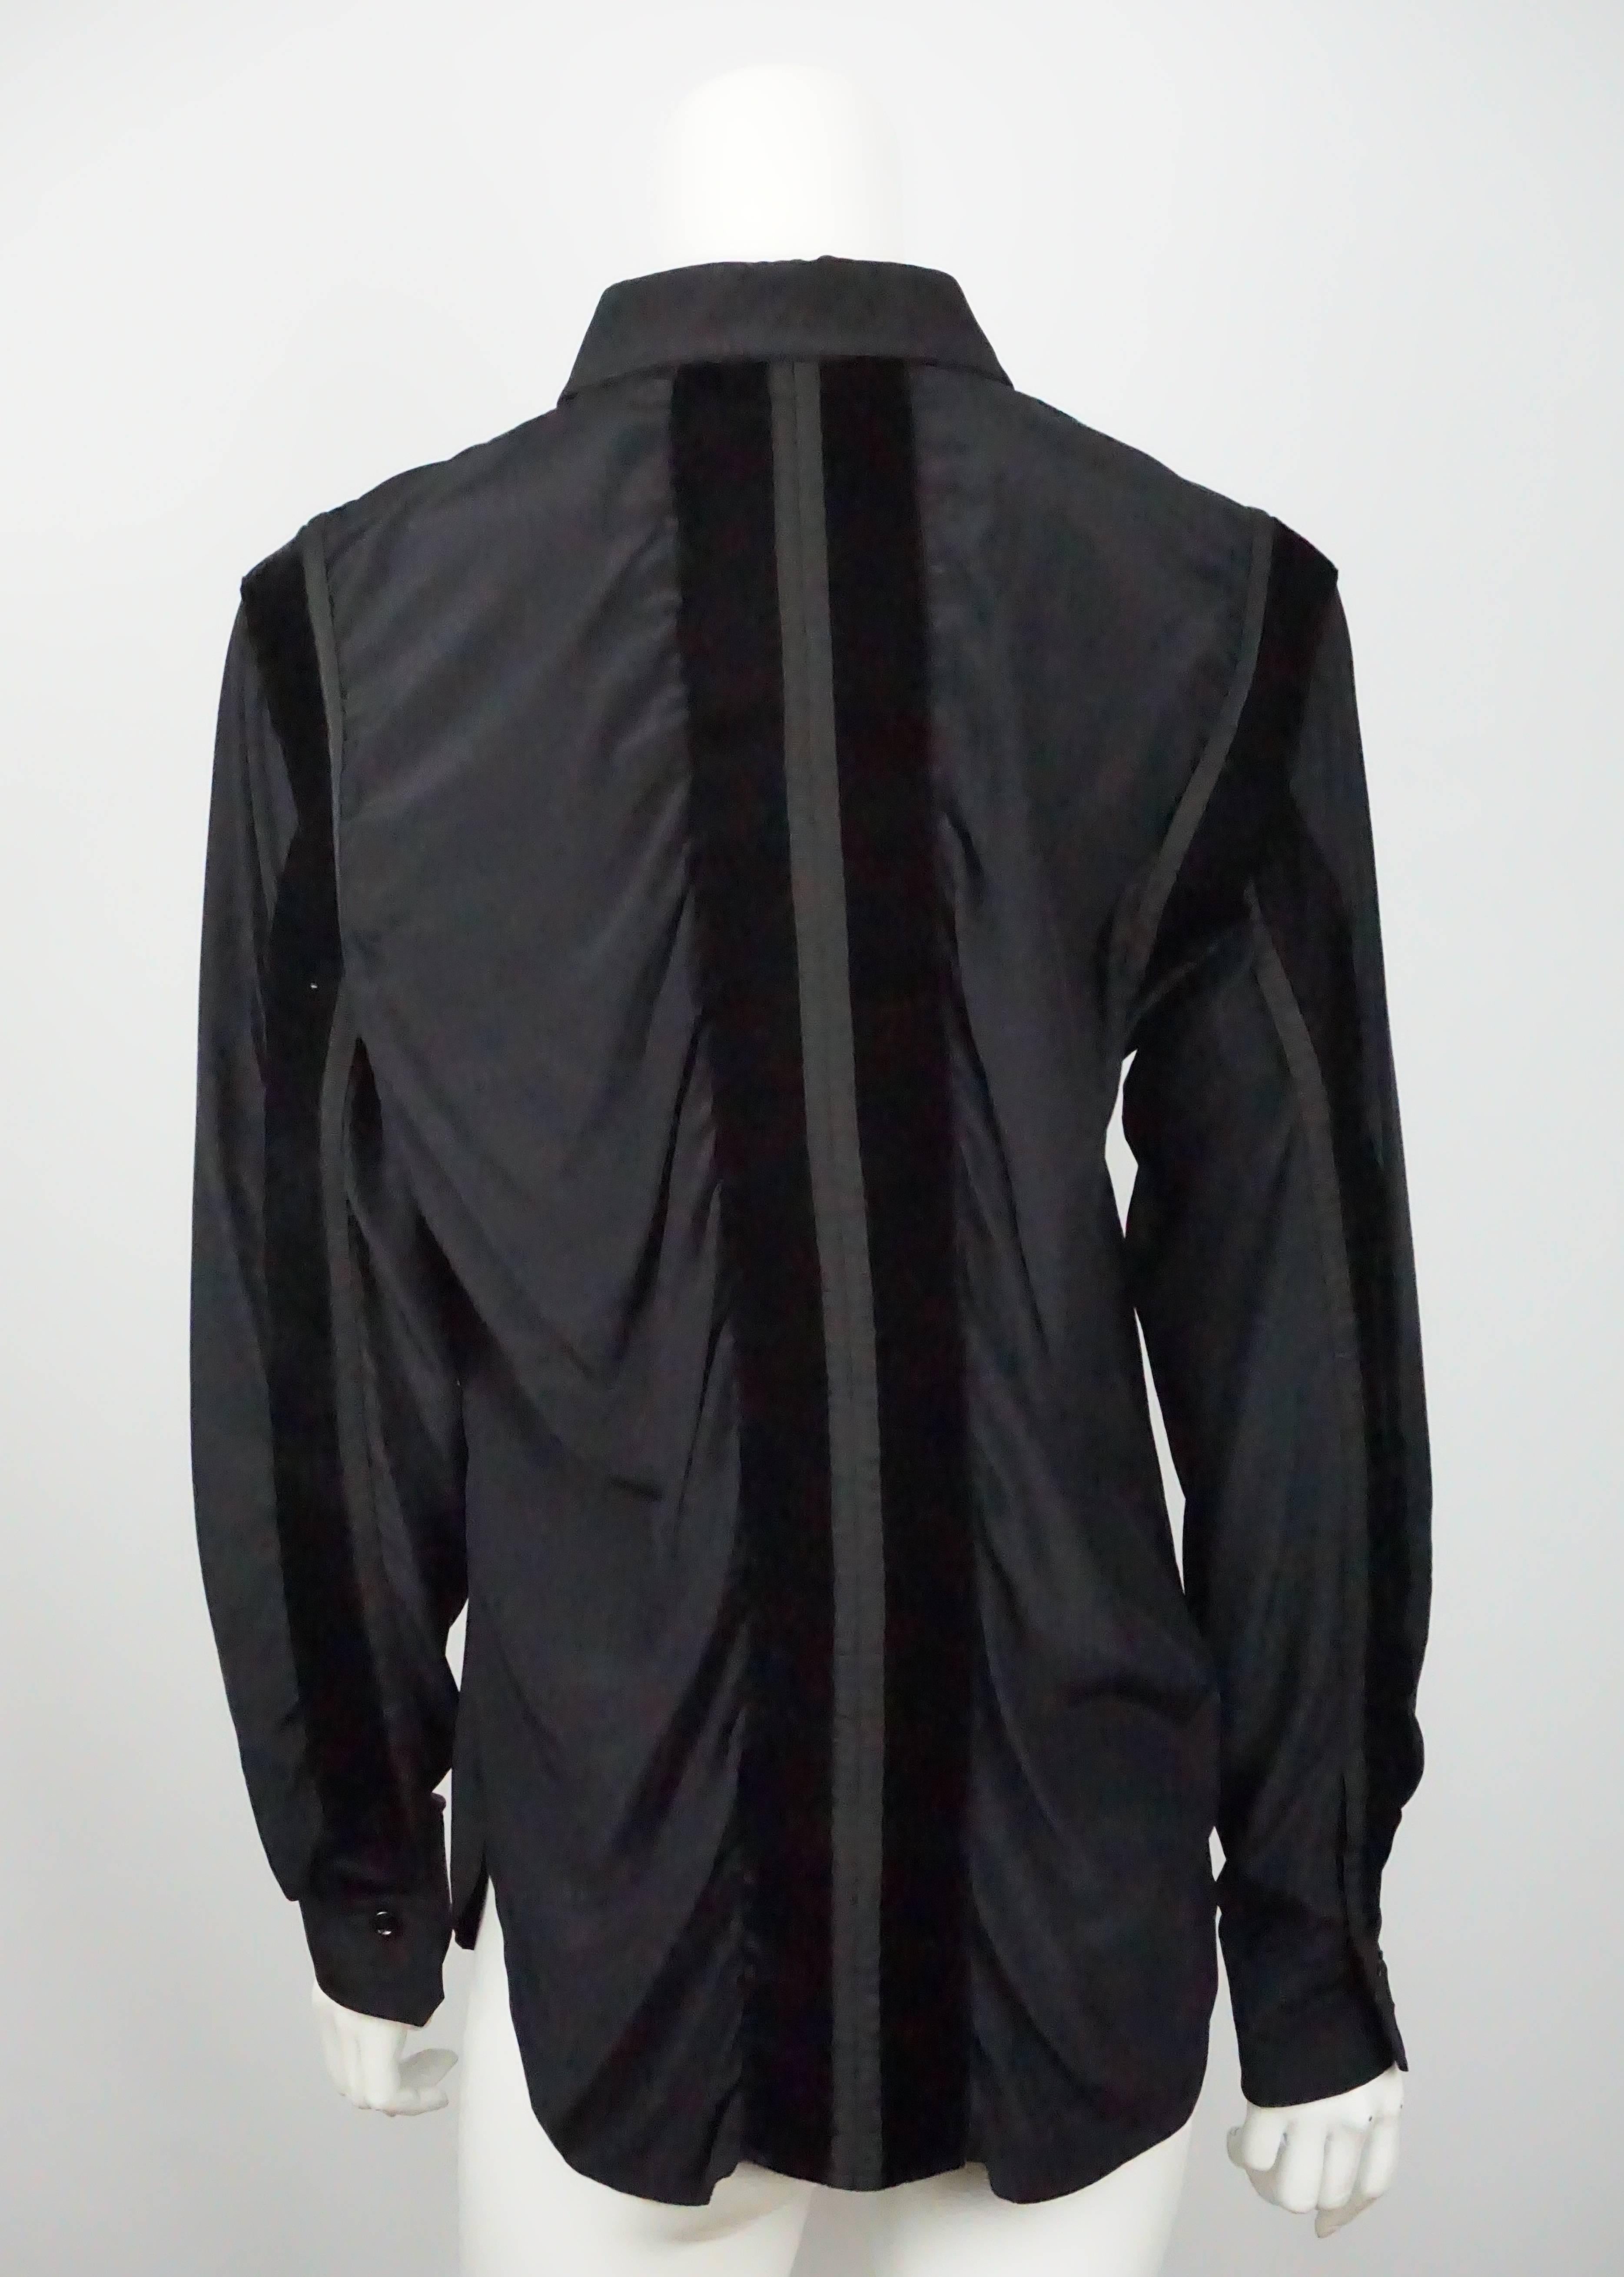 Yves Saint Laurent Rive Gauche Black Long Sleeve Silk with Velvet Detail Top  In Excellent Condition For Sale In West Palm Beach, FL